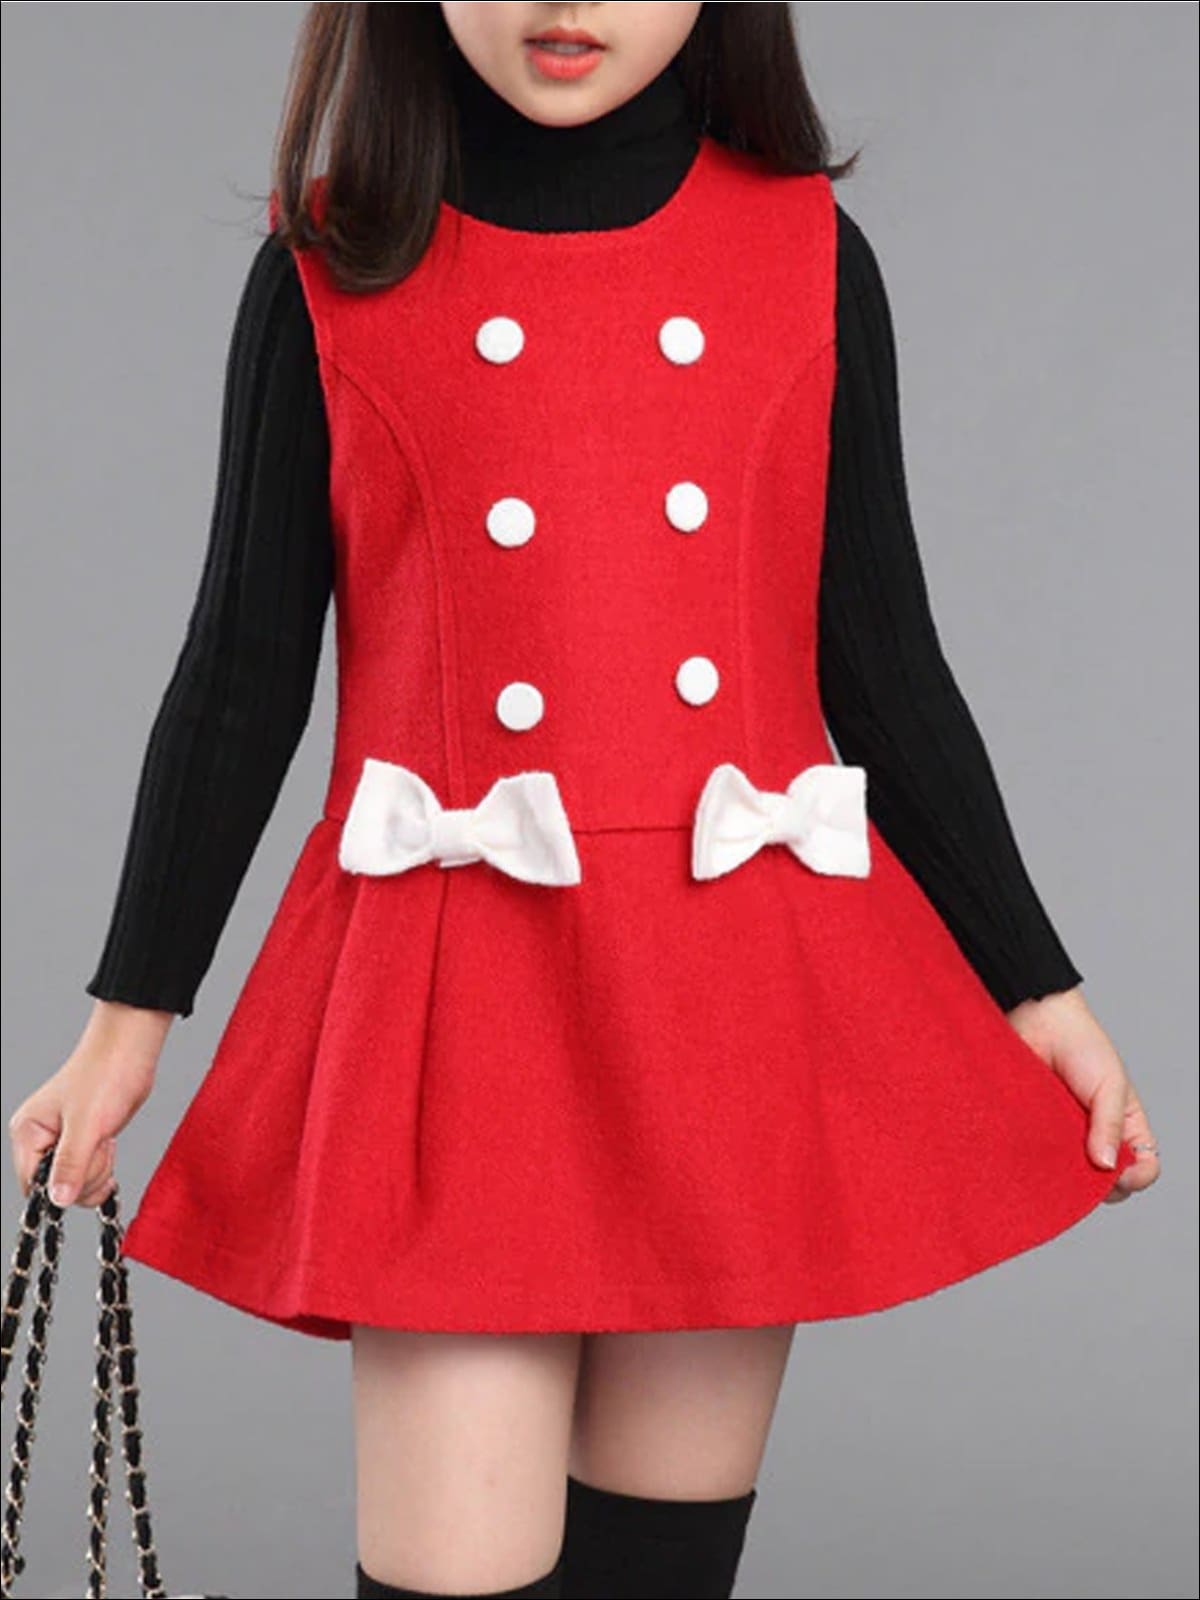 Girls Preppy Fall Button Up Bow Tie Wool Dress - Red / 5/6 - Girls Fall Casual Dress